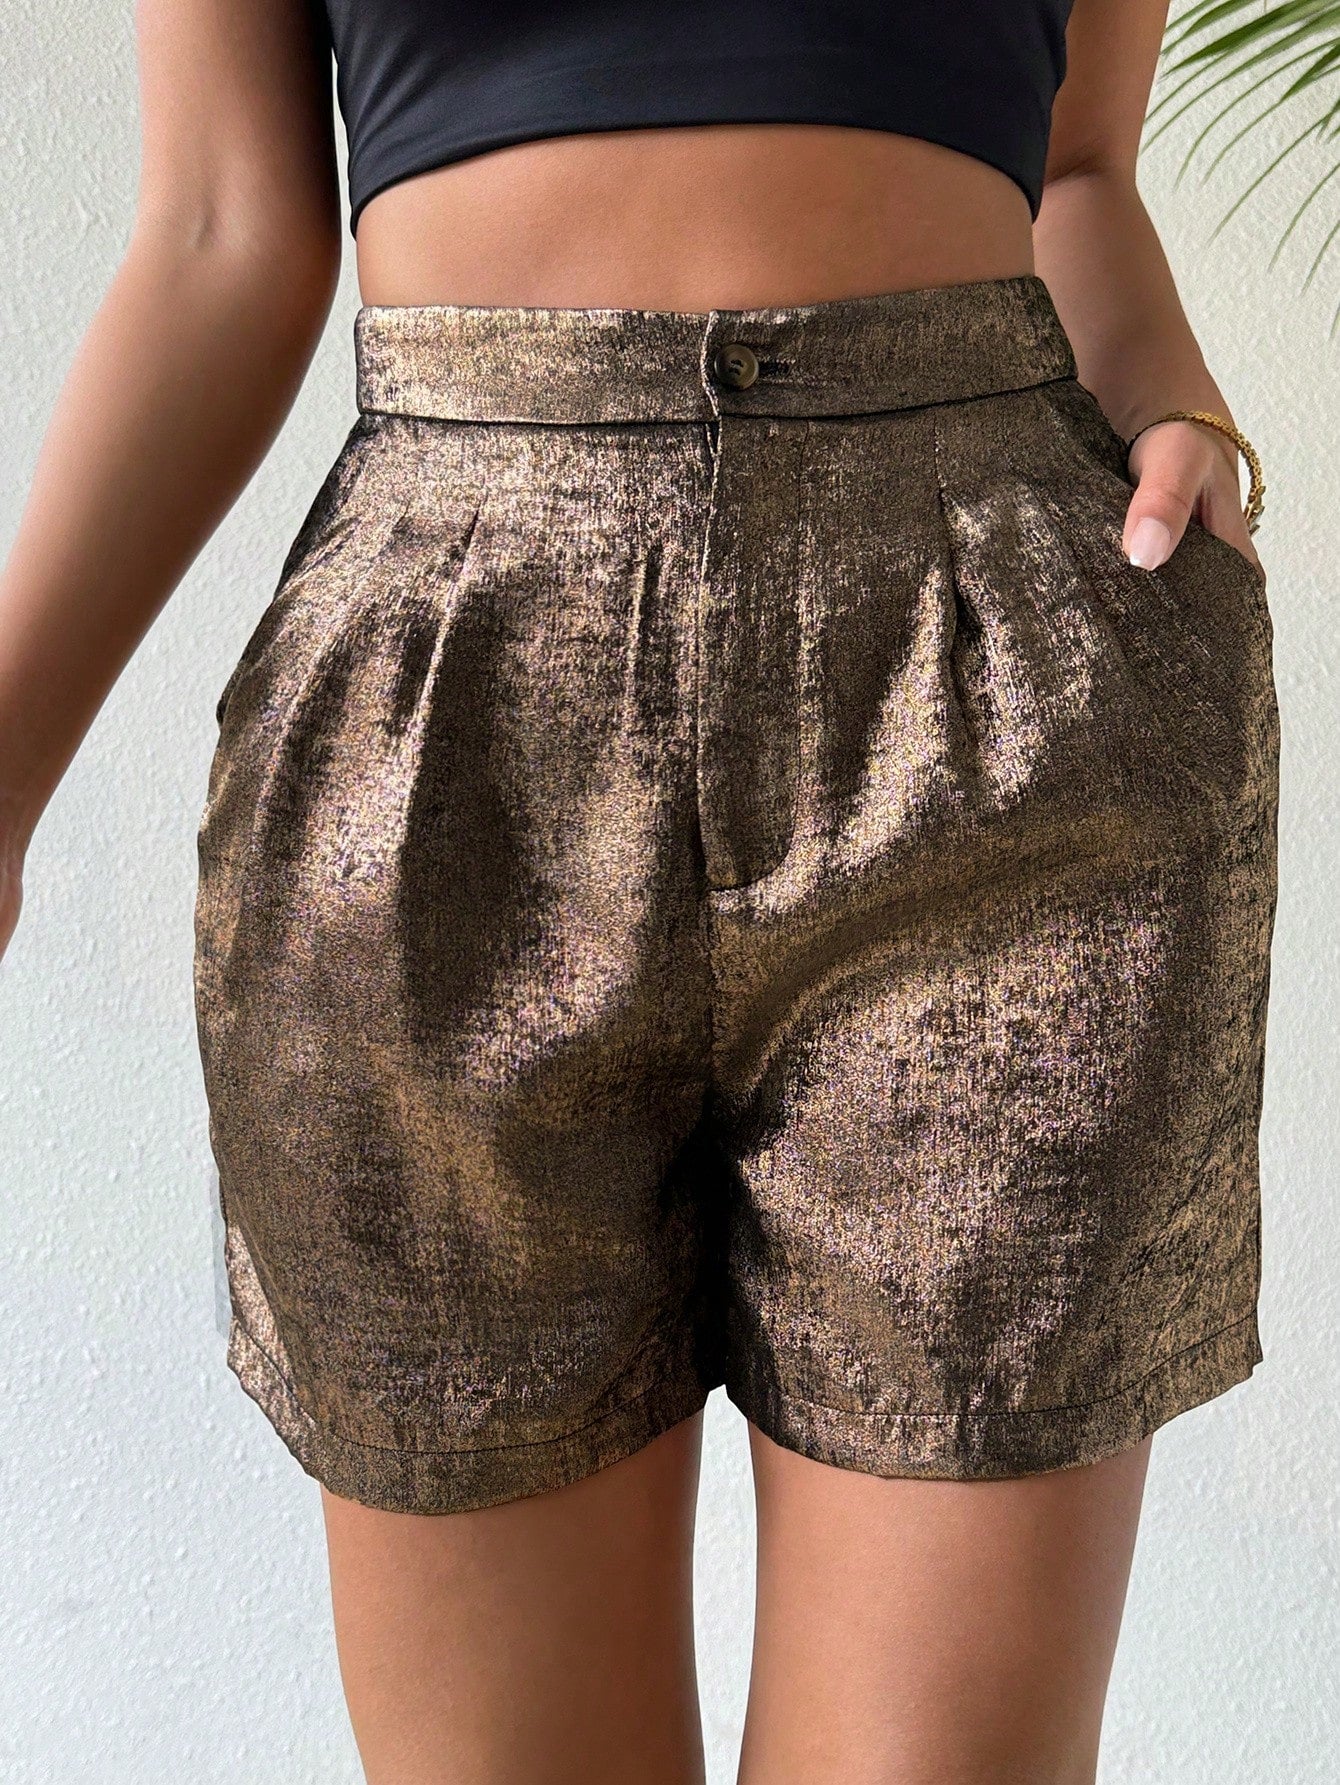 Fashionable Women Shorts With A Golden Gloss And Pockets